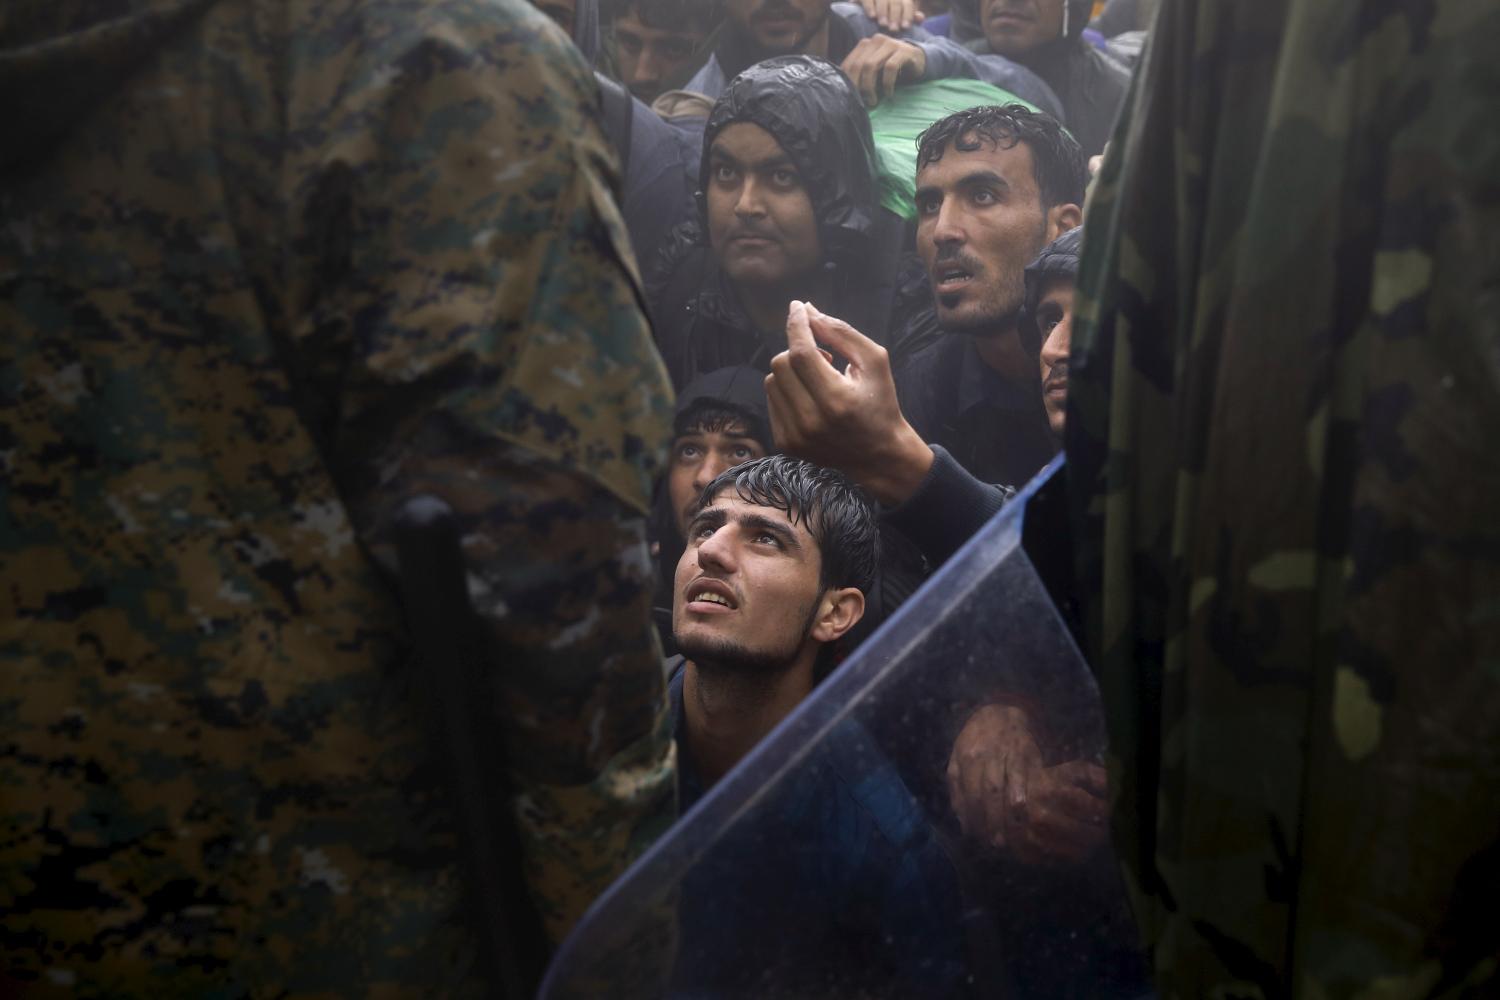 Migrants and refugees beg Macedonian policemen to allow passage to cross the border from Greece into Macedonia during a rainstorm, near the Greek village of Idomeni, September 10, 2015. Reuters and The New York Times shared the Pulitzer Prize for breaking news photography for images of the migrant crisis in Europe and the Middle East. REUTERS/Yannis Behrakis      TPX IMAGES OF THE DAY      - GF10000387306